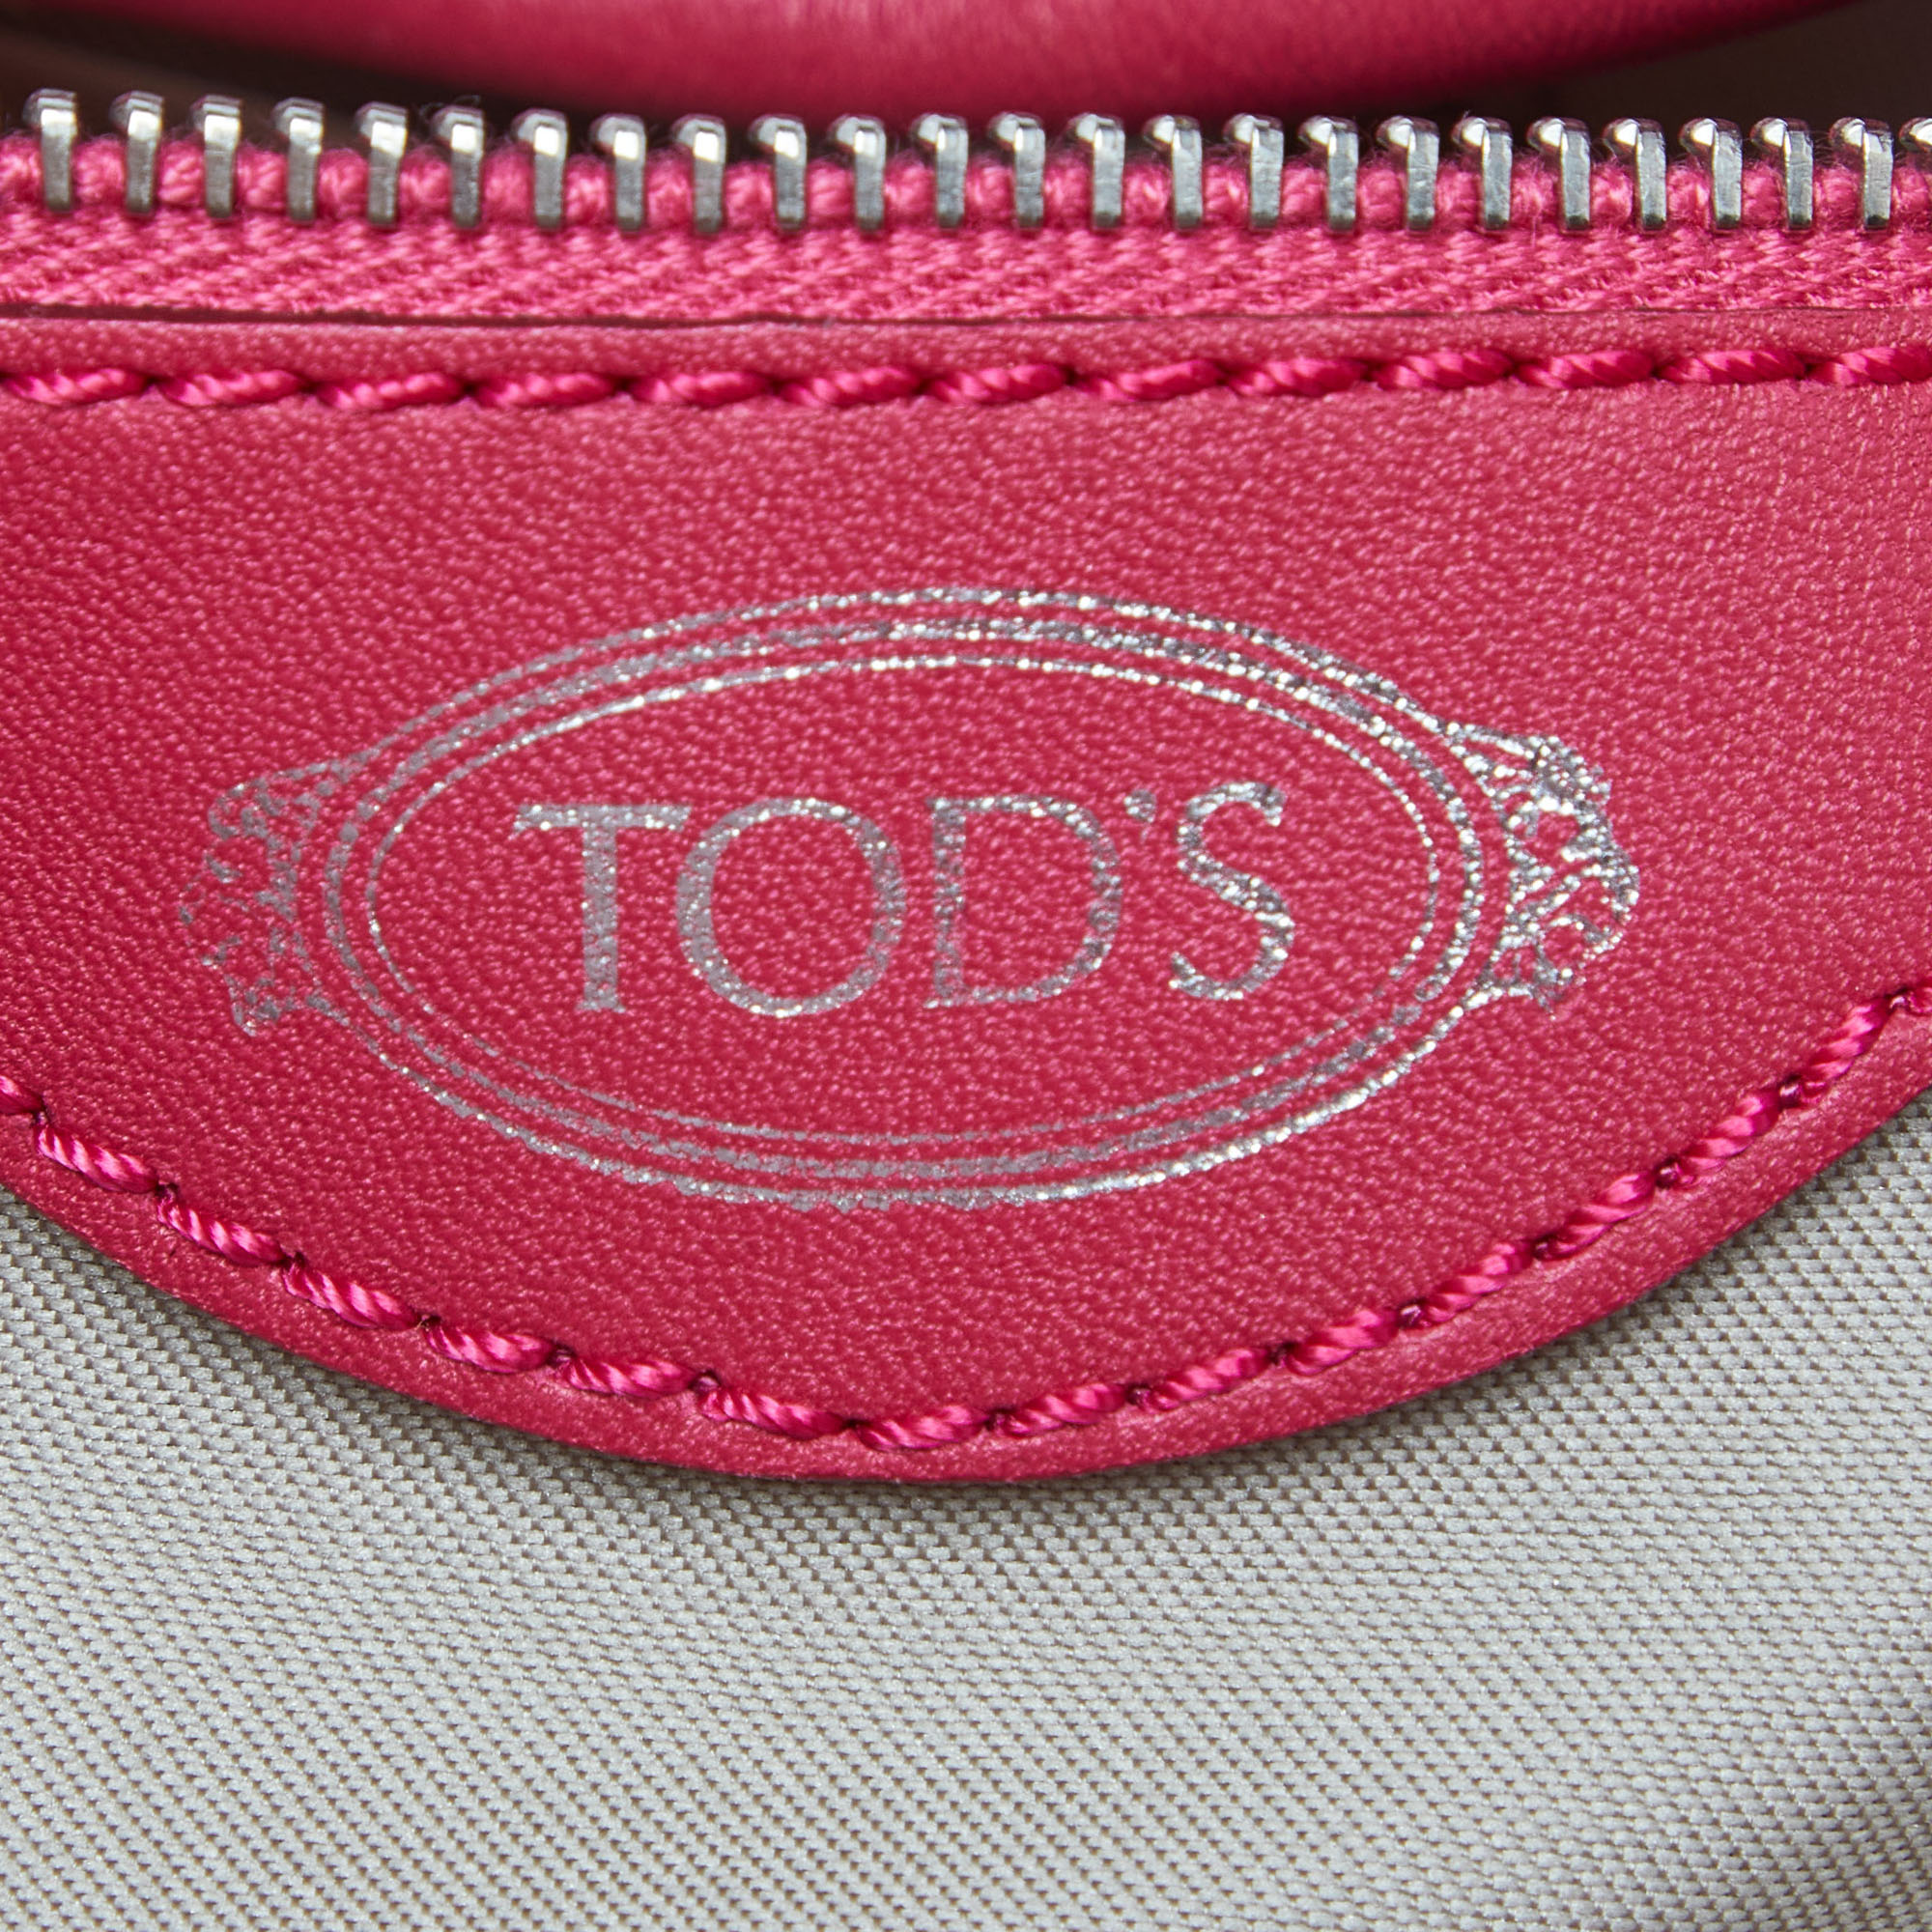 Tod's Pink Leather Media Shopper Tote